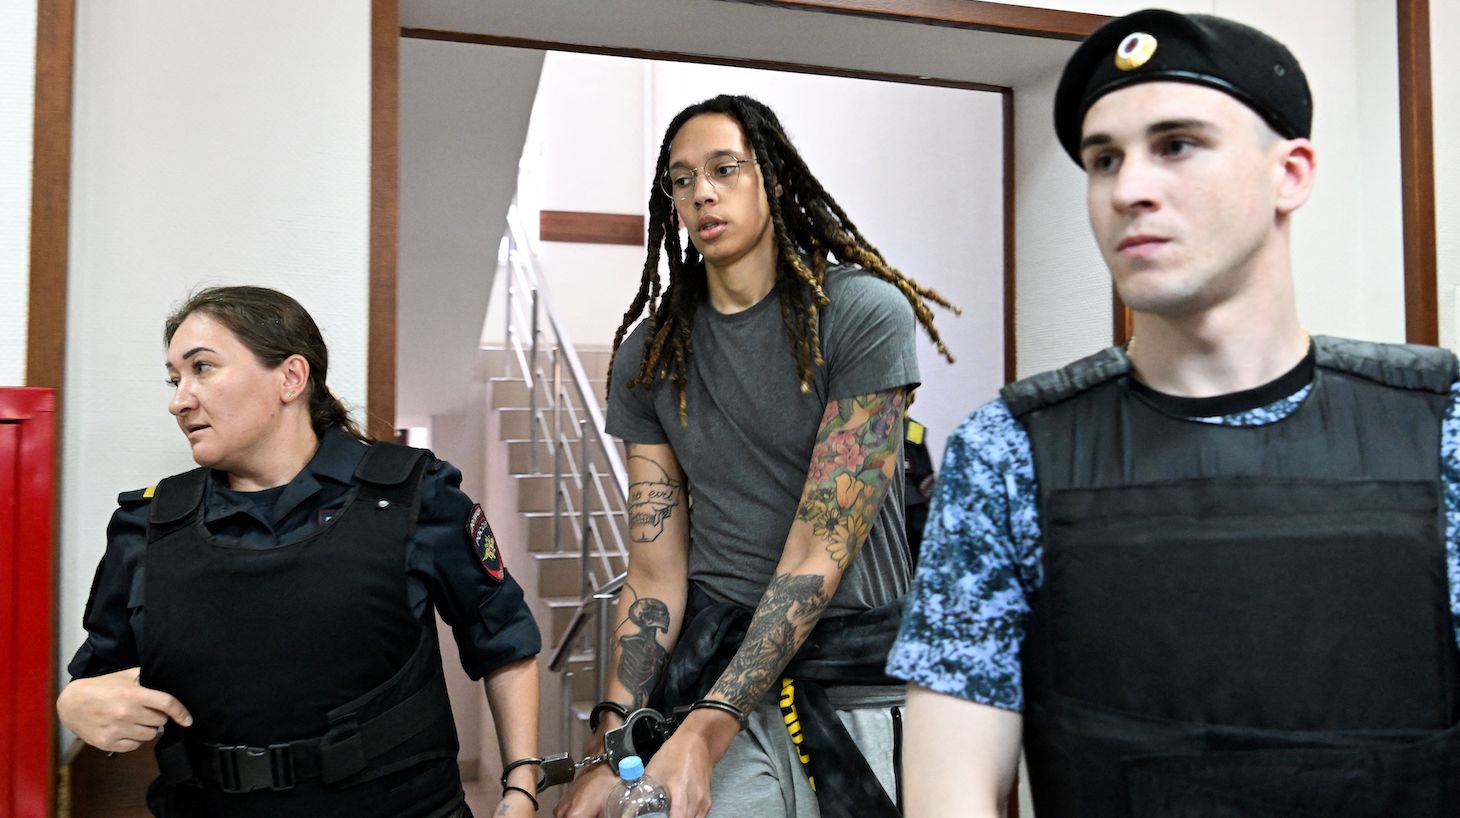 US WNBA basketball superstar Brittney Griner arrives to a hearing at the Khimki Court, outside Moscow on June 27, 2022.